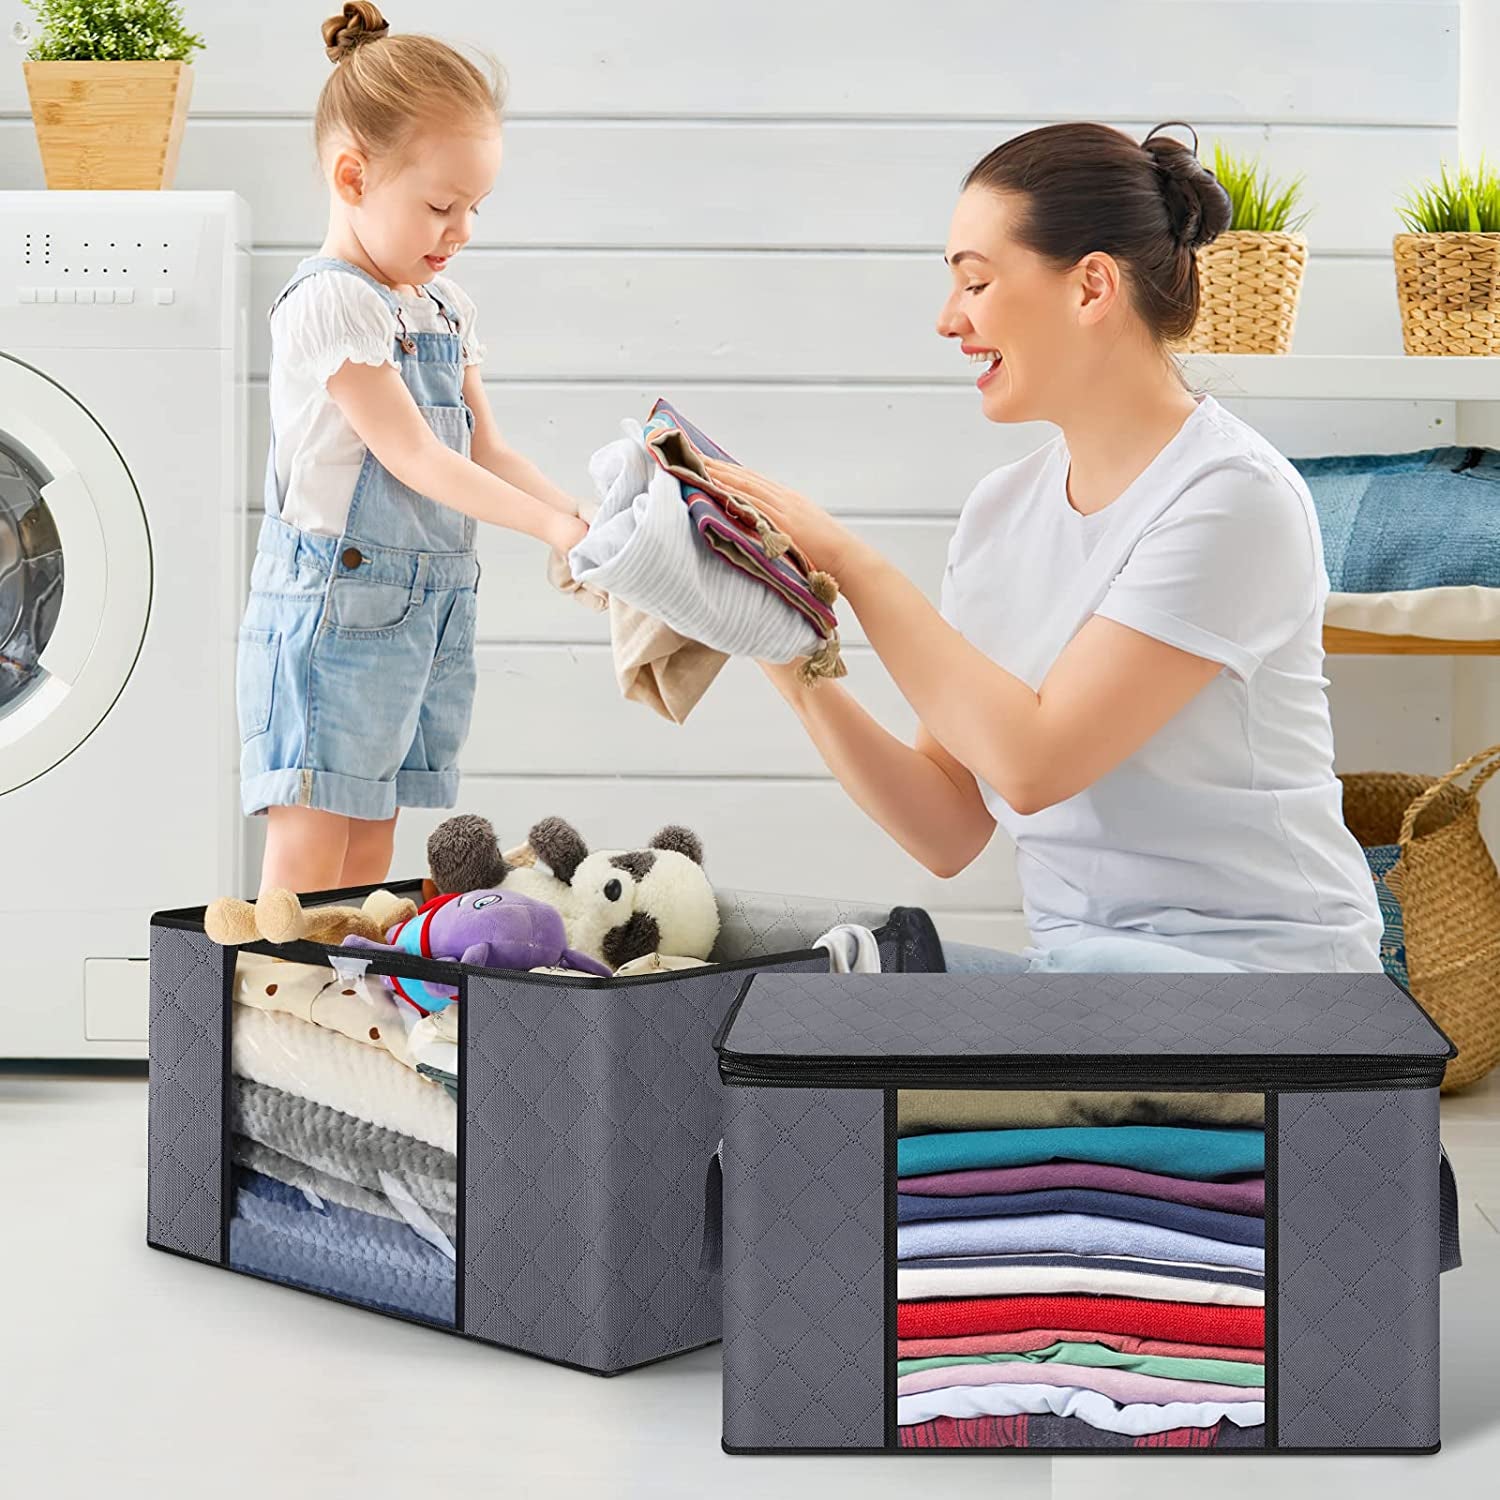 6-Pack Clothes Storage Organizer, Large Capacity Blanket Storage Bags with Reinforced Handles & Sturdy Zippers, Foldable Clothing Storage Organizer Container for Comforters, Blankets, Bedding (Grey)